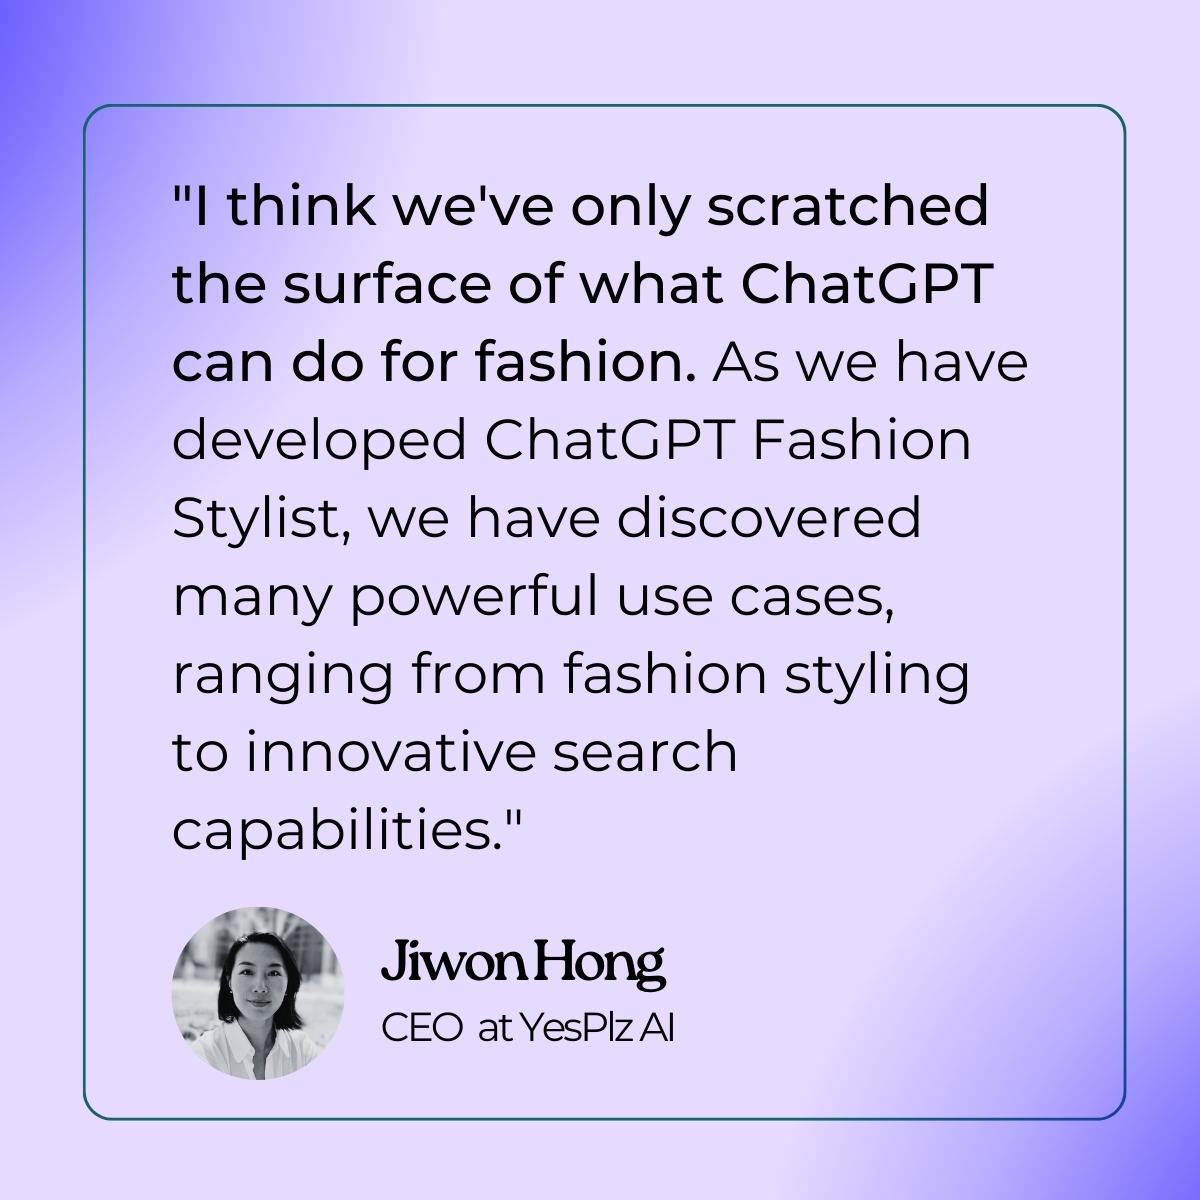 ChatGPT for fashion quote by YesPlz AI CEO Jiwon Hong against a gradient background